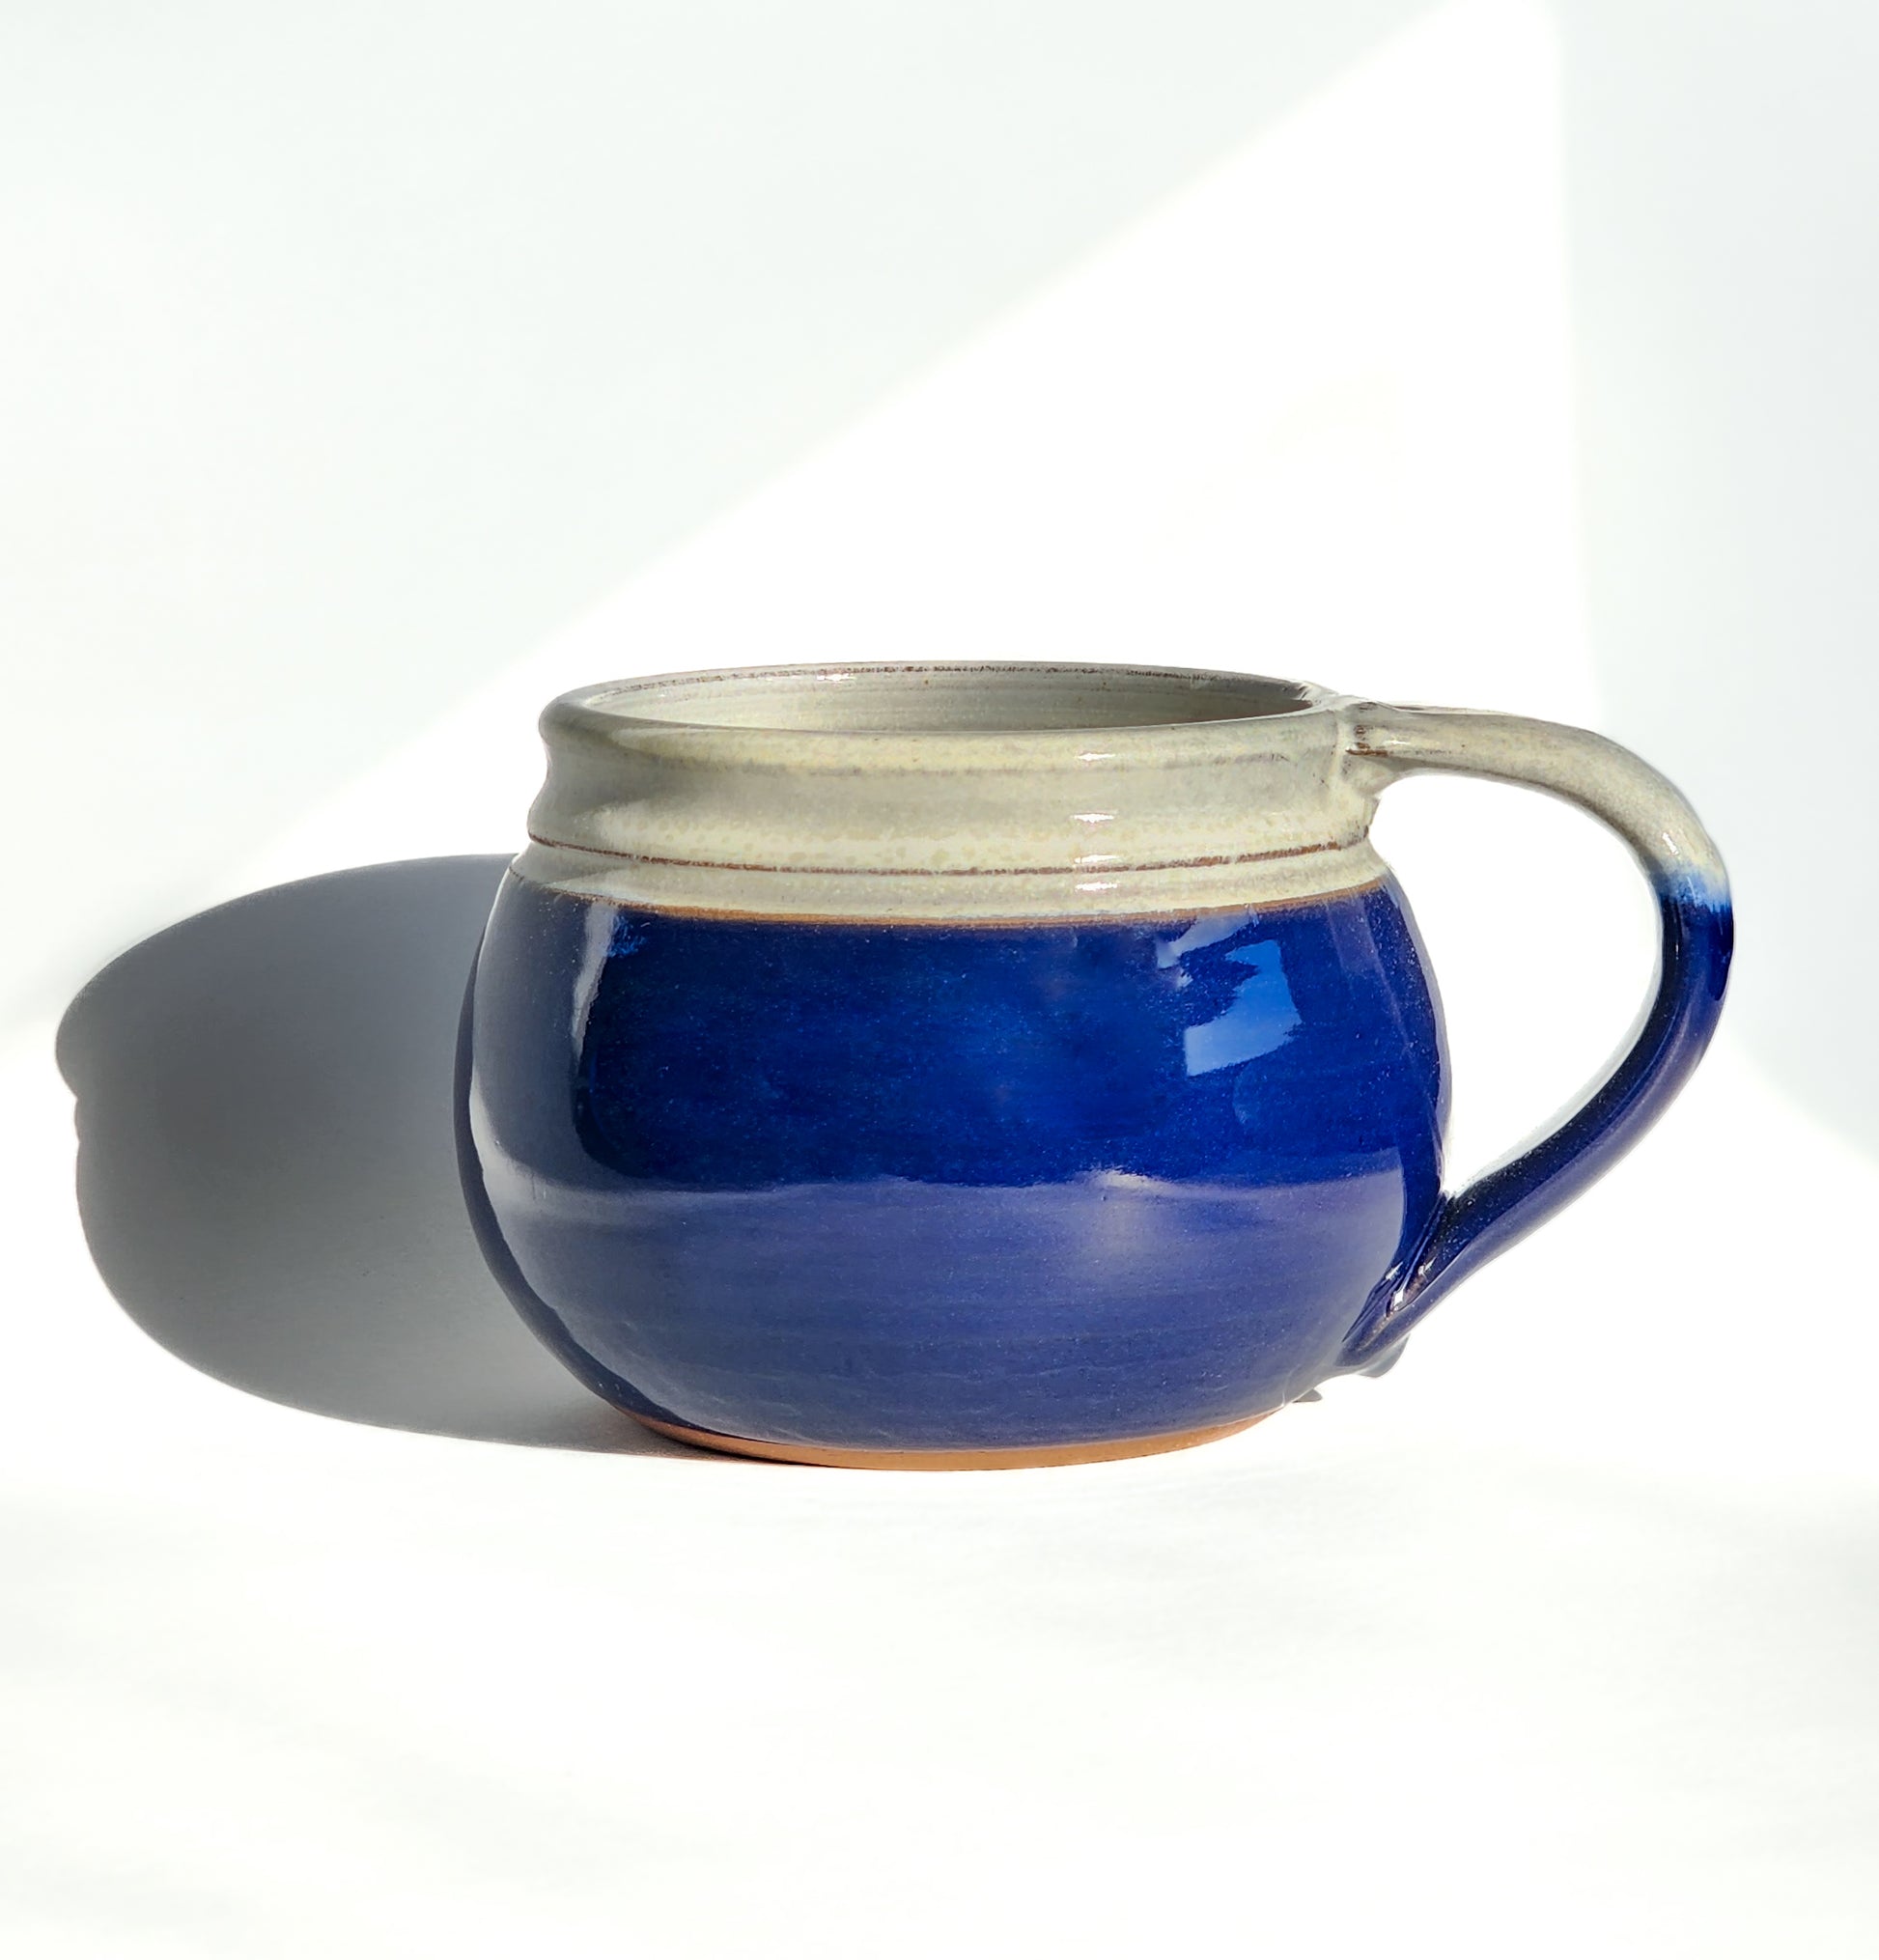 Image: Clinton Pottery's 24 oz Cereal/Soup Mug in Cobalt Blue – A bold and sophisticated choice for your kitchen, this machine washable mug seamlessly blends artistry with functionality. The deep Cobalt Blue color adds a touch of richness, reminiscent of clear skies and ocean depths. Perfect for enjoying your favorite cereal or soup, bringing a pop of timeless elegance to your dining experience.